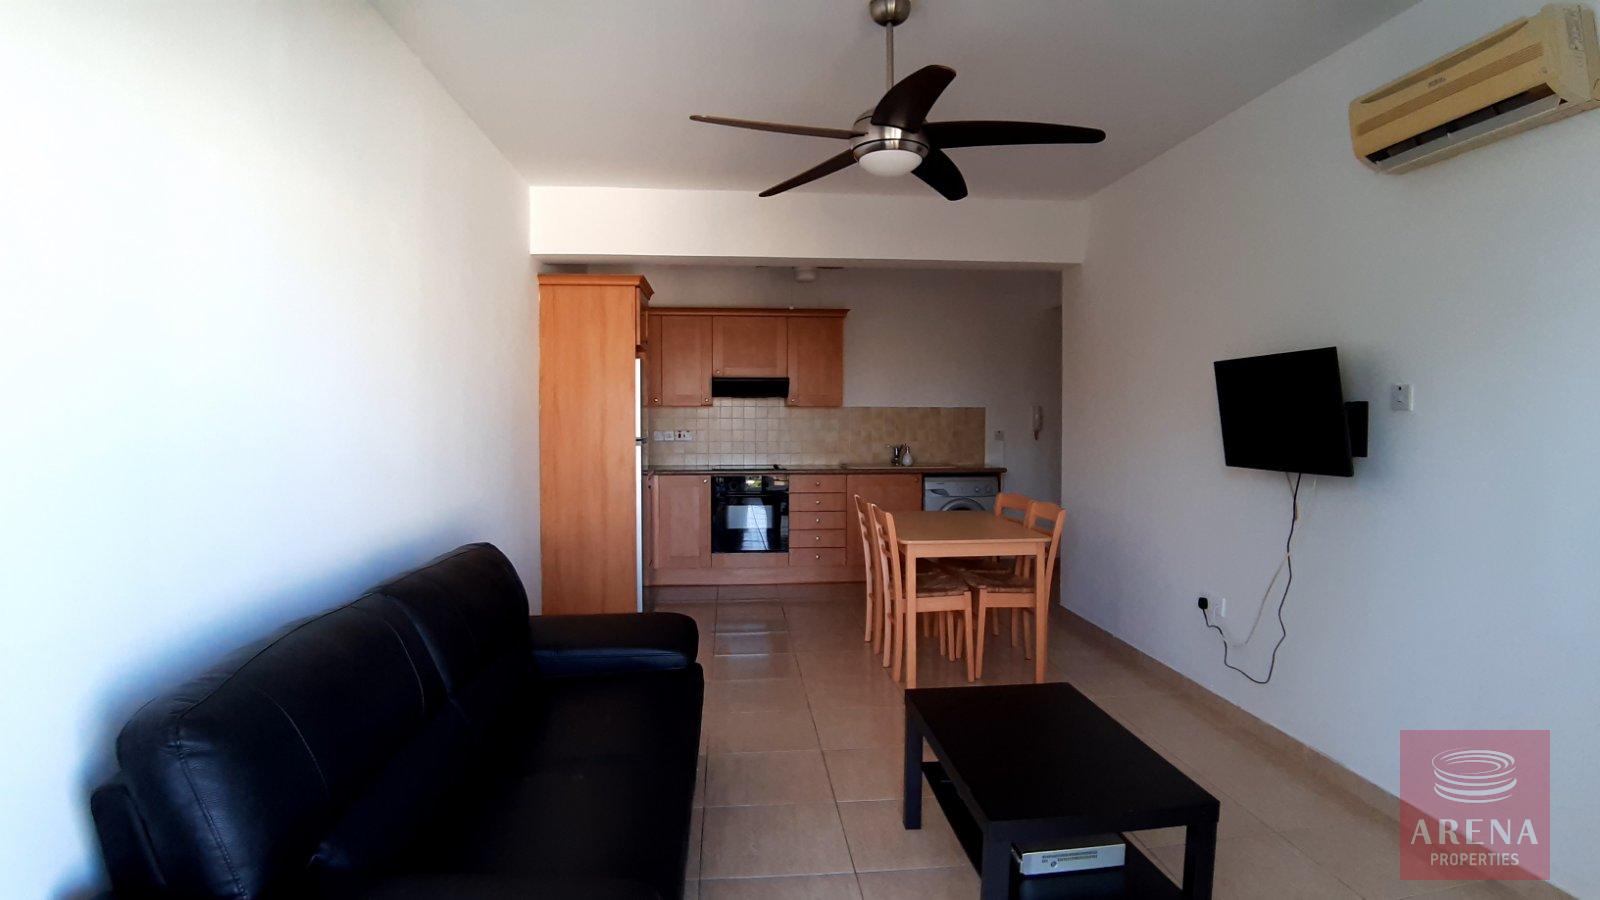 2 Bed Apt for rent in Paralimni - living area